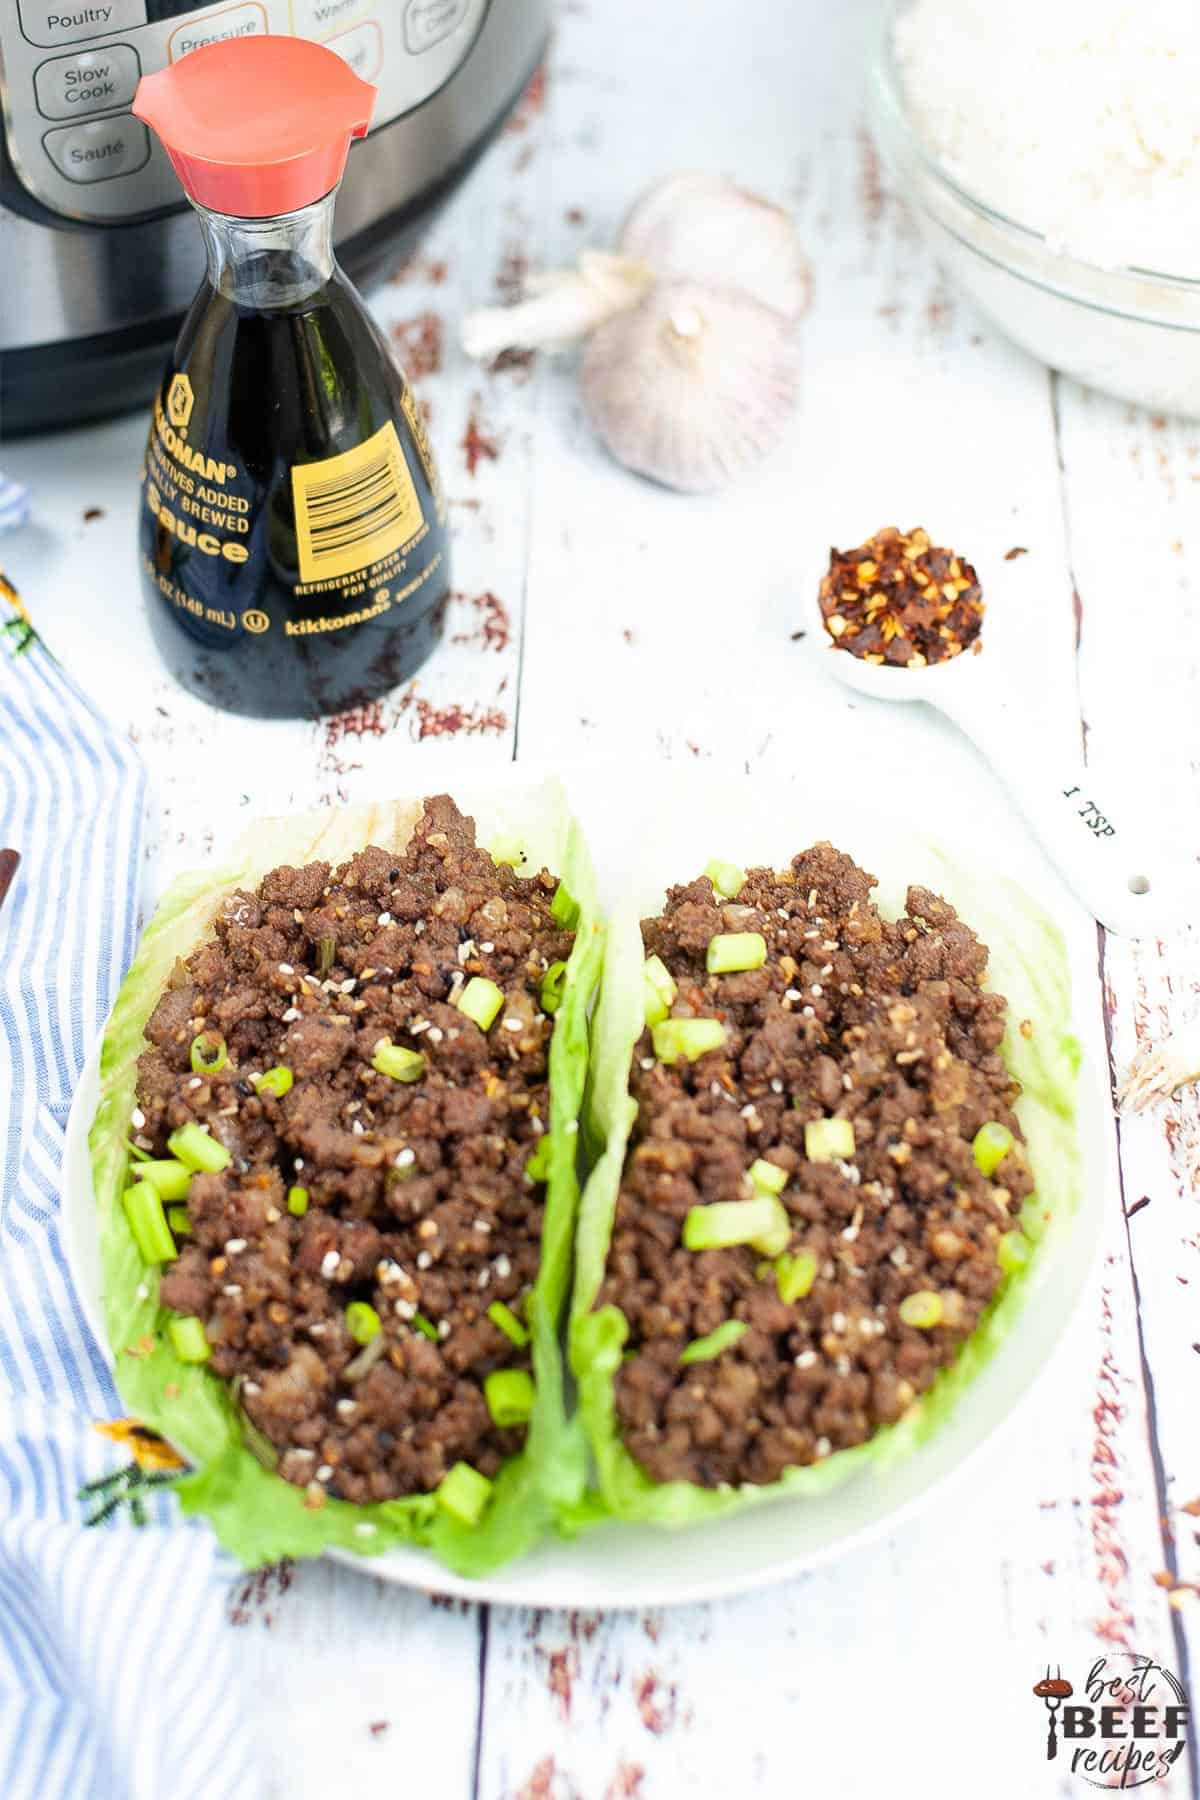 Korean ground beef in two lettuce cups near a bottle of soy sauce